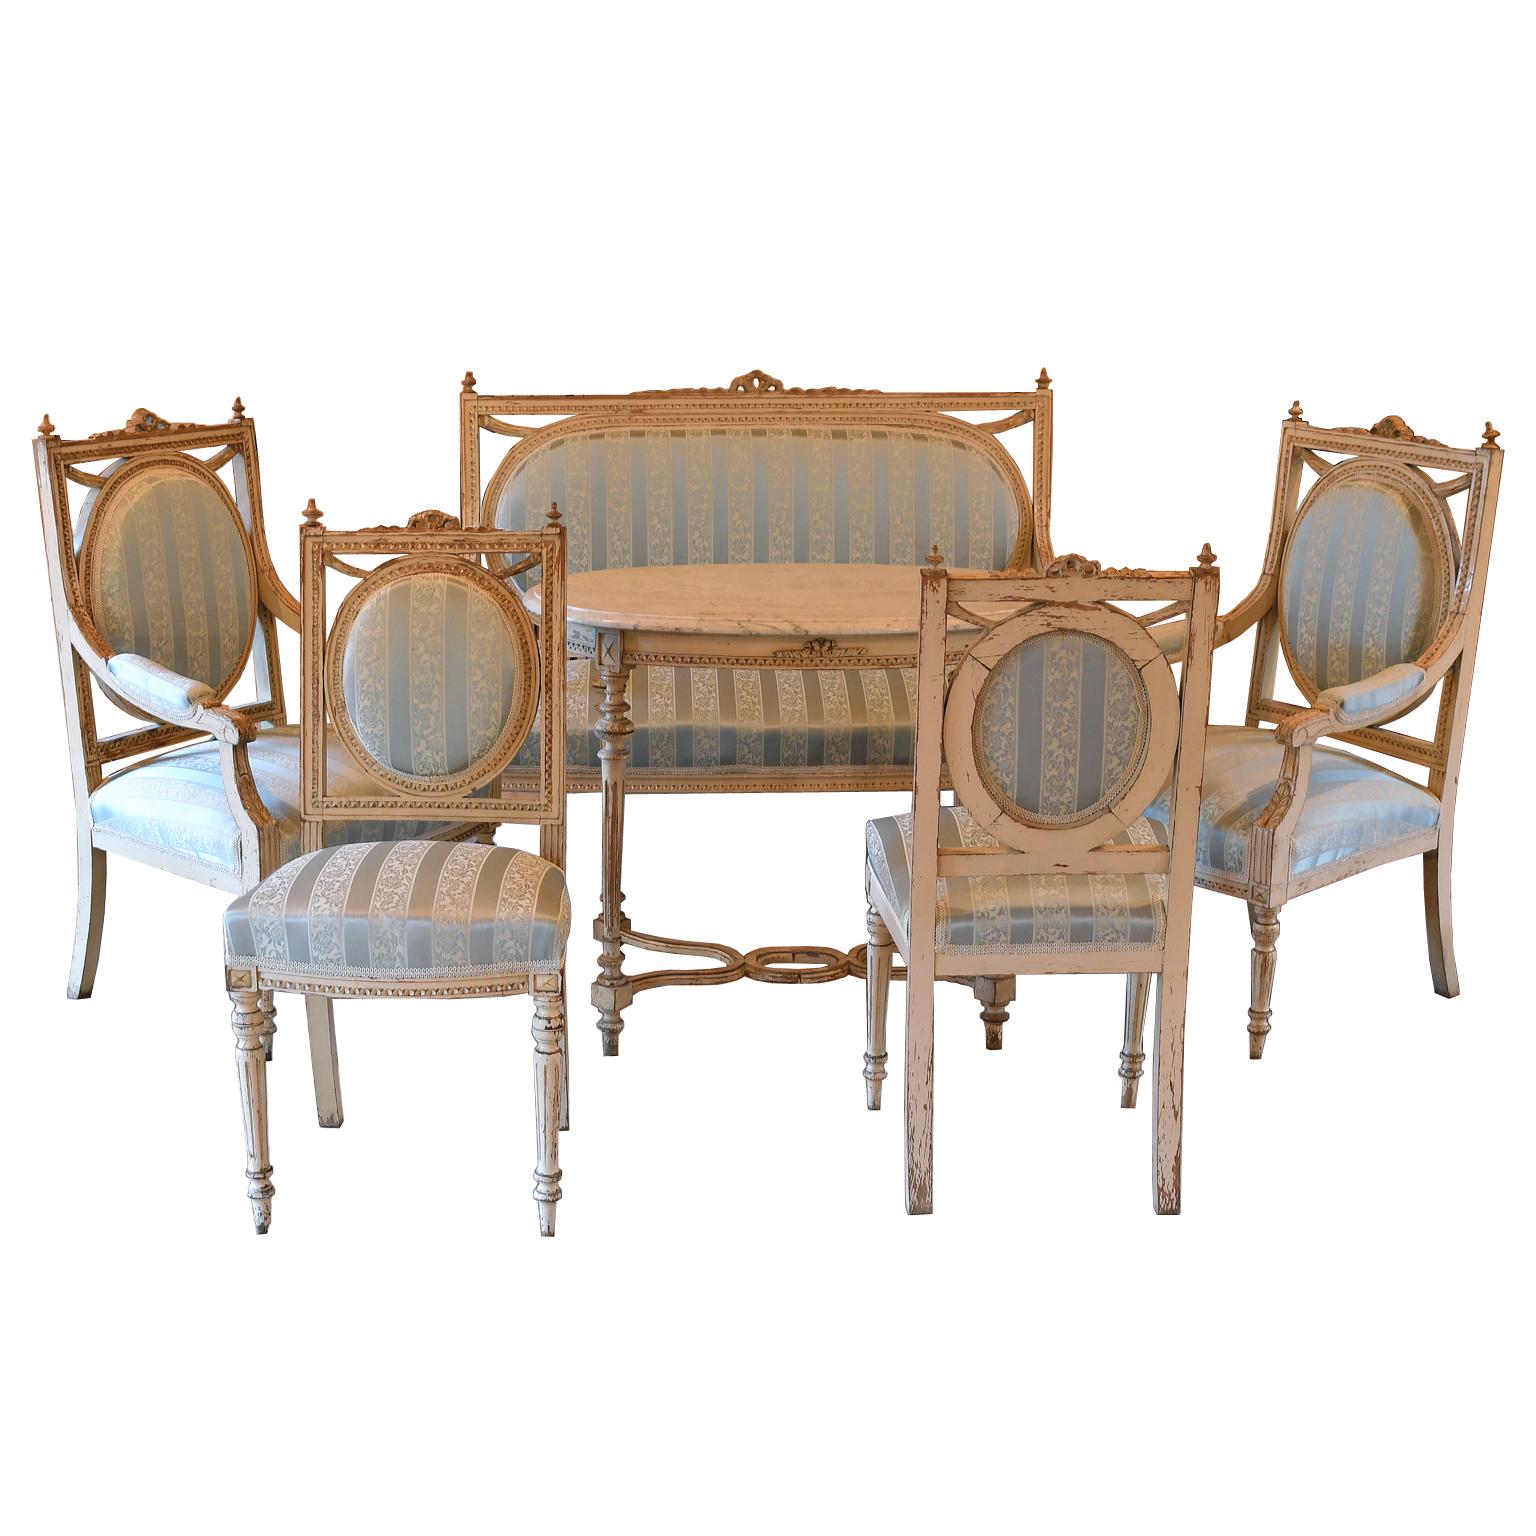 A lovely Louis XVI style salon suite comprising of: (1) canape or settee, (2) armchairs, (2) side chairs & an oval tea table. Sweden, circa 1915. Carved wooden frames have the original white/grey Gustavian paint with just the right amount of